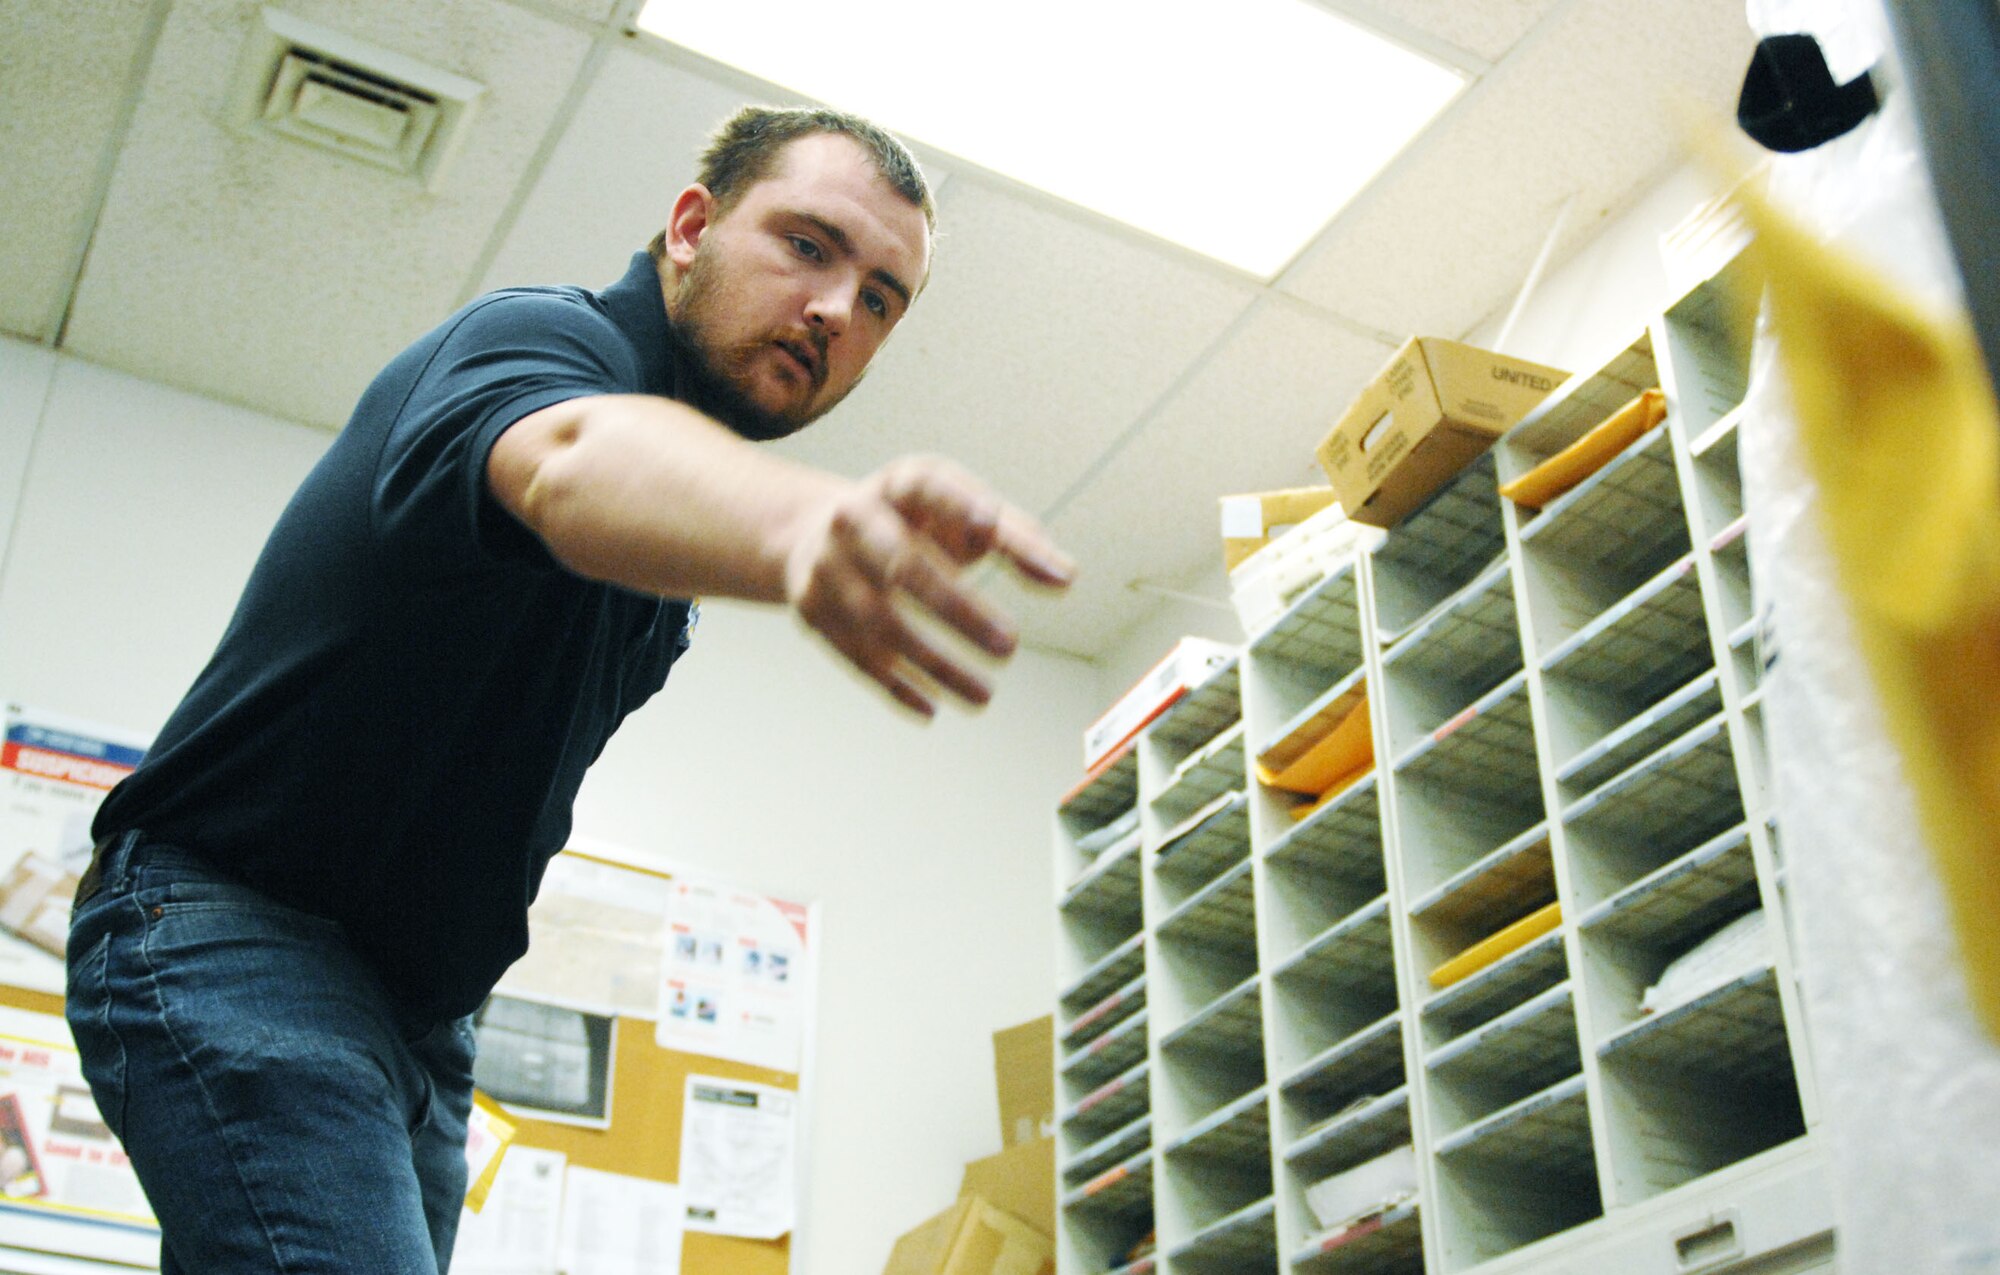 Donald Morris Jr., an employee at the Official Mail Center, sorts letters and packages that arrived earlier that morning.  After sorting, the mail is distributed around the base.